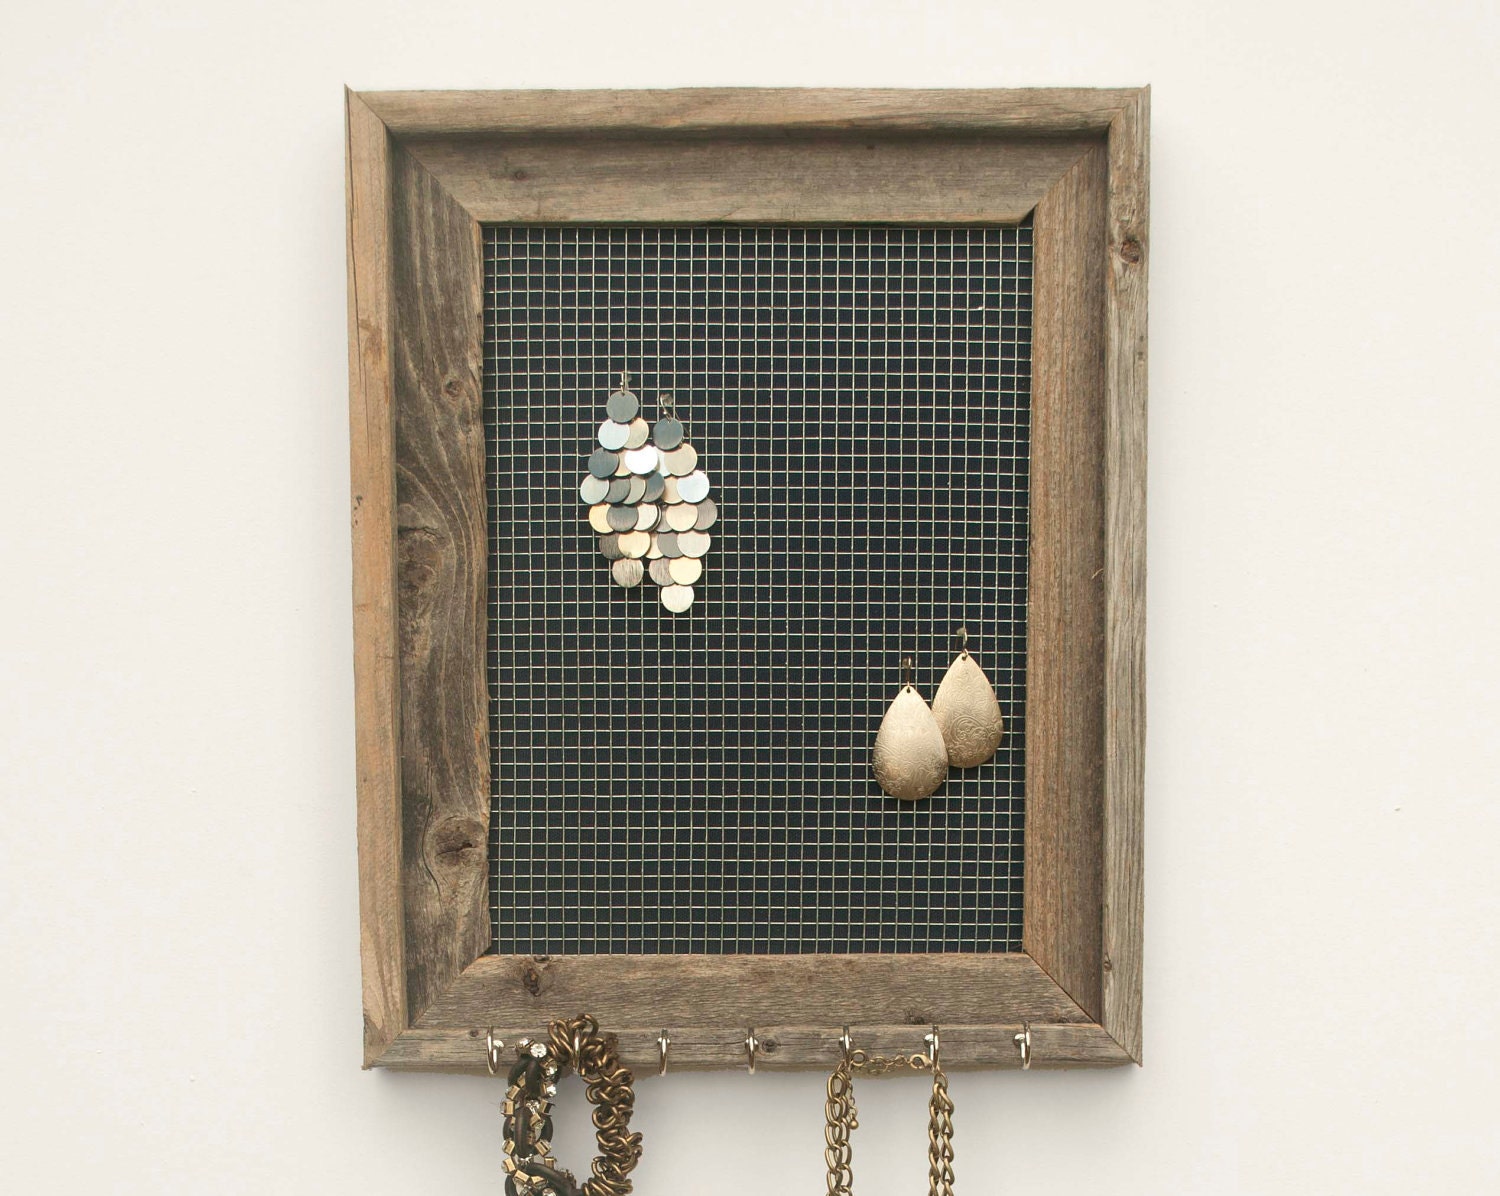 Buried Treasure Rustic Jewelry Holder - Navy Blue - 9 x 12 - geaugaroots